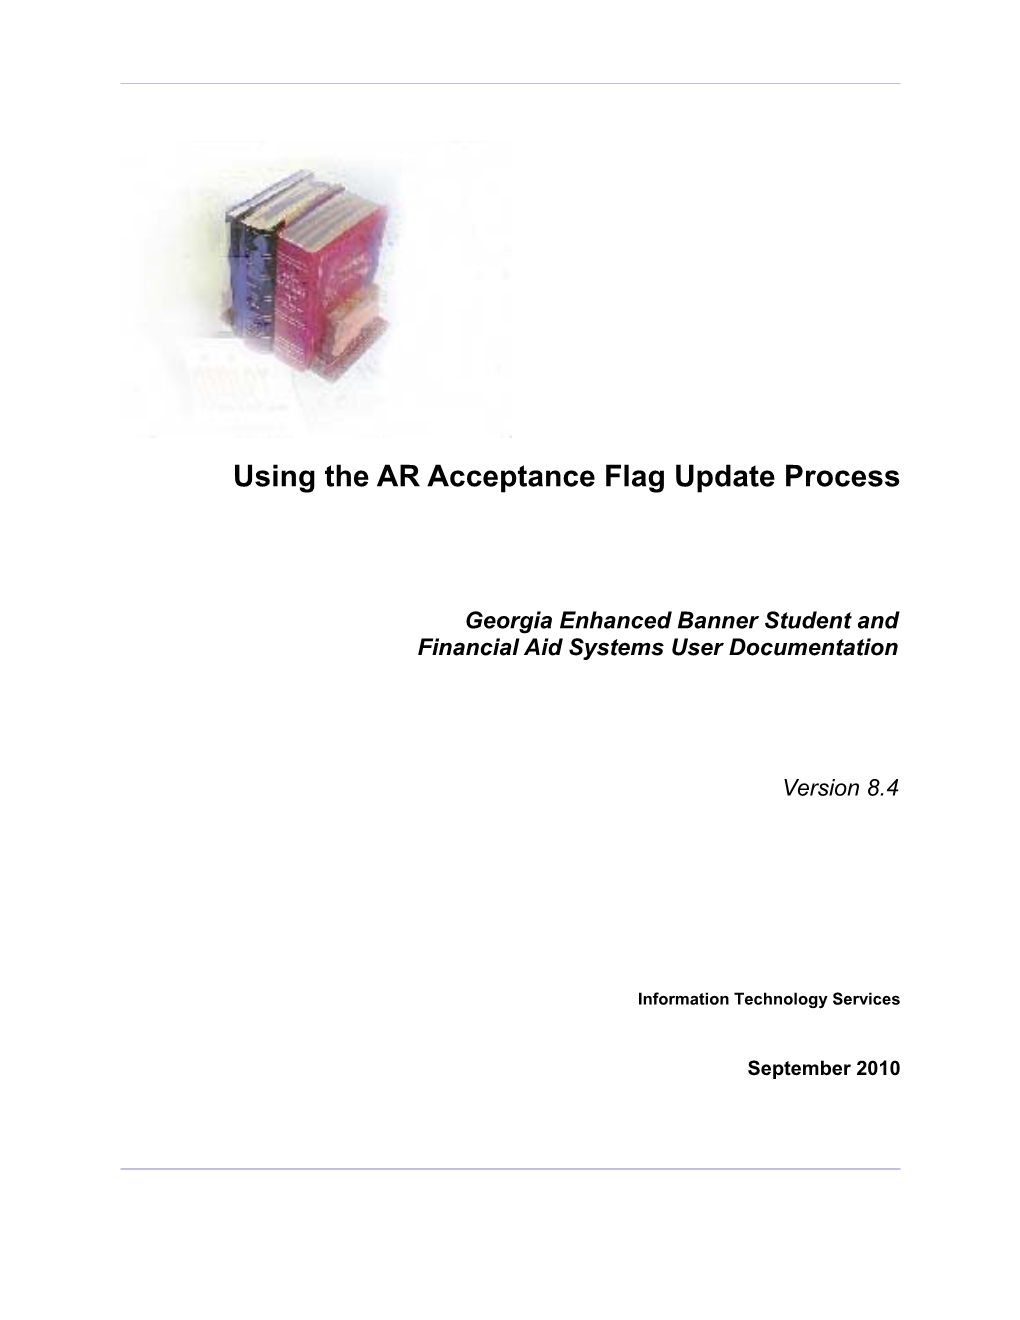 Using the AR Acceptance Flag Update Process